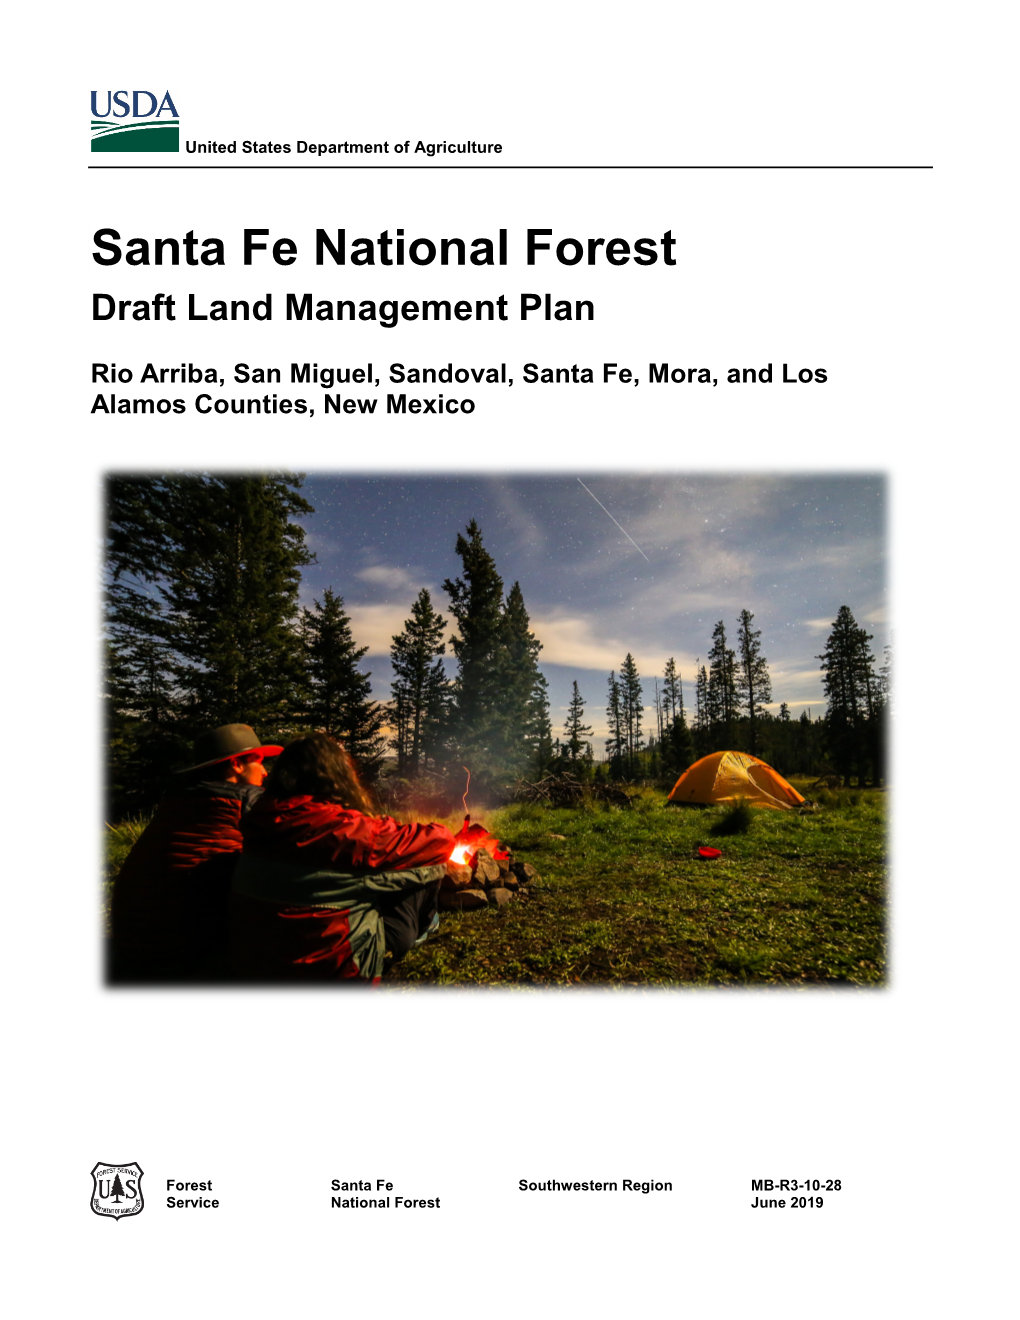 Draft Forest Plan